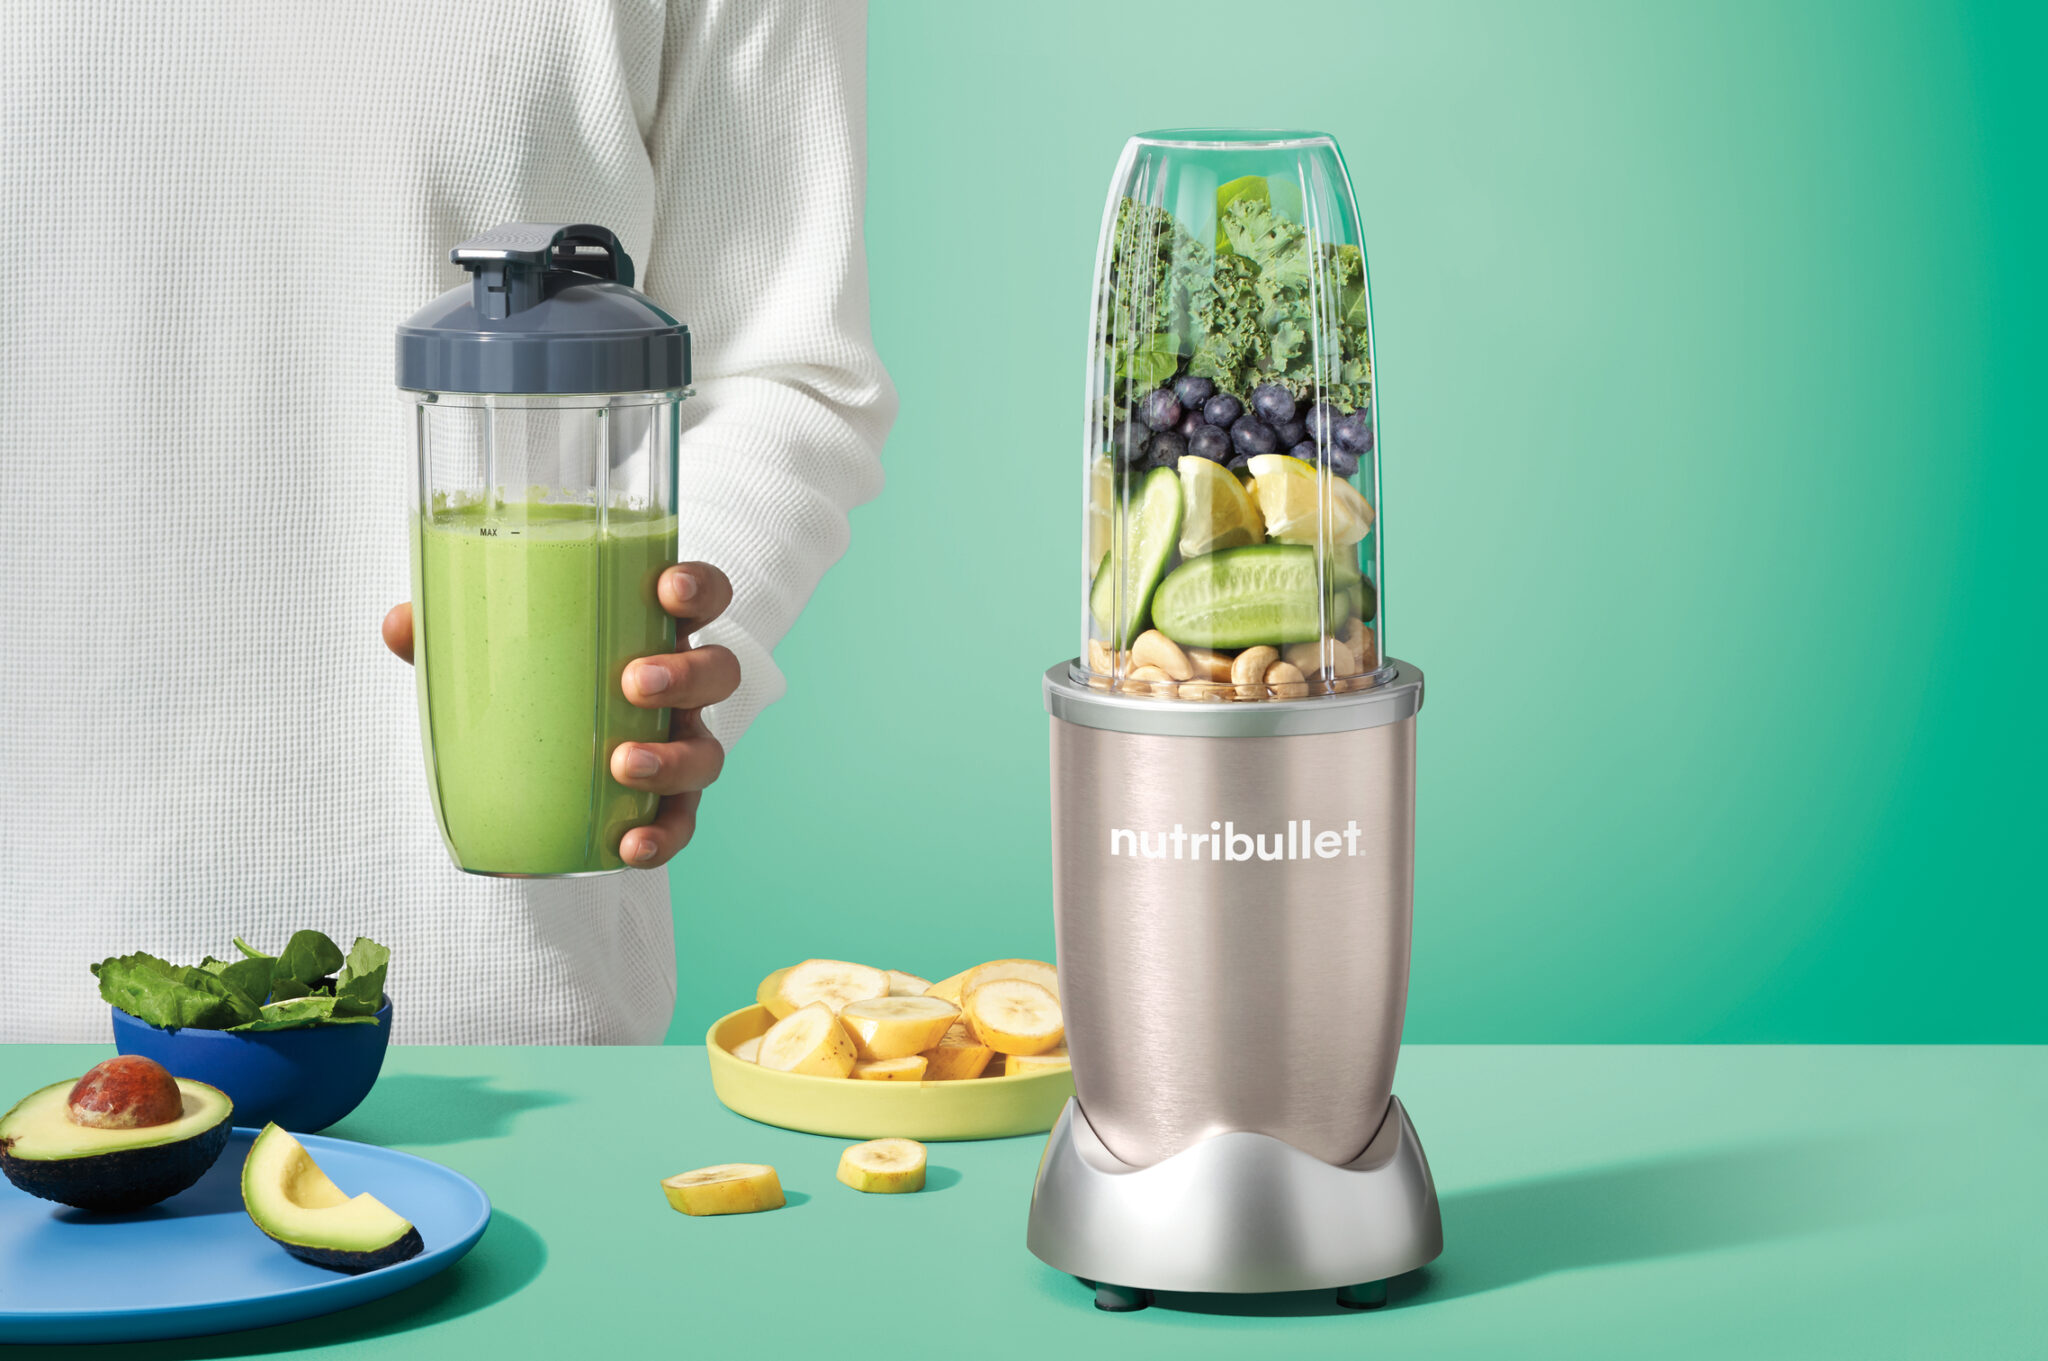 nutribullet Pro Smoothie Maker NB910CP 11999 Euro Visual 021 scaled - Vitaminbombs at Home